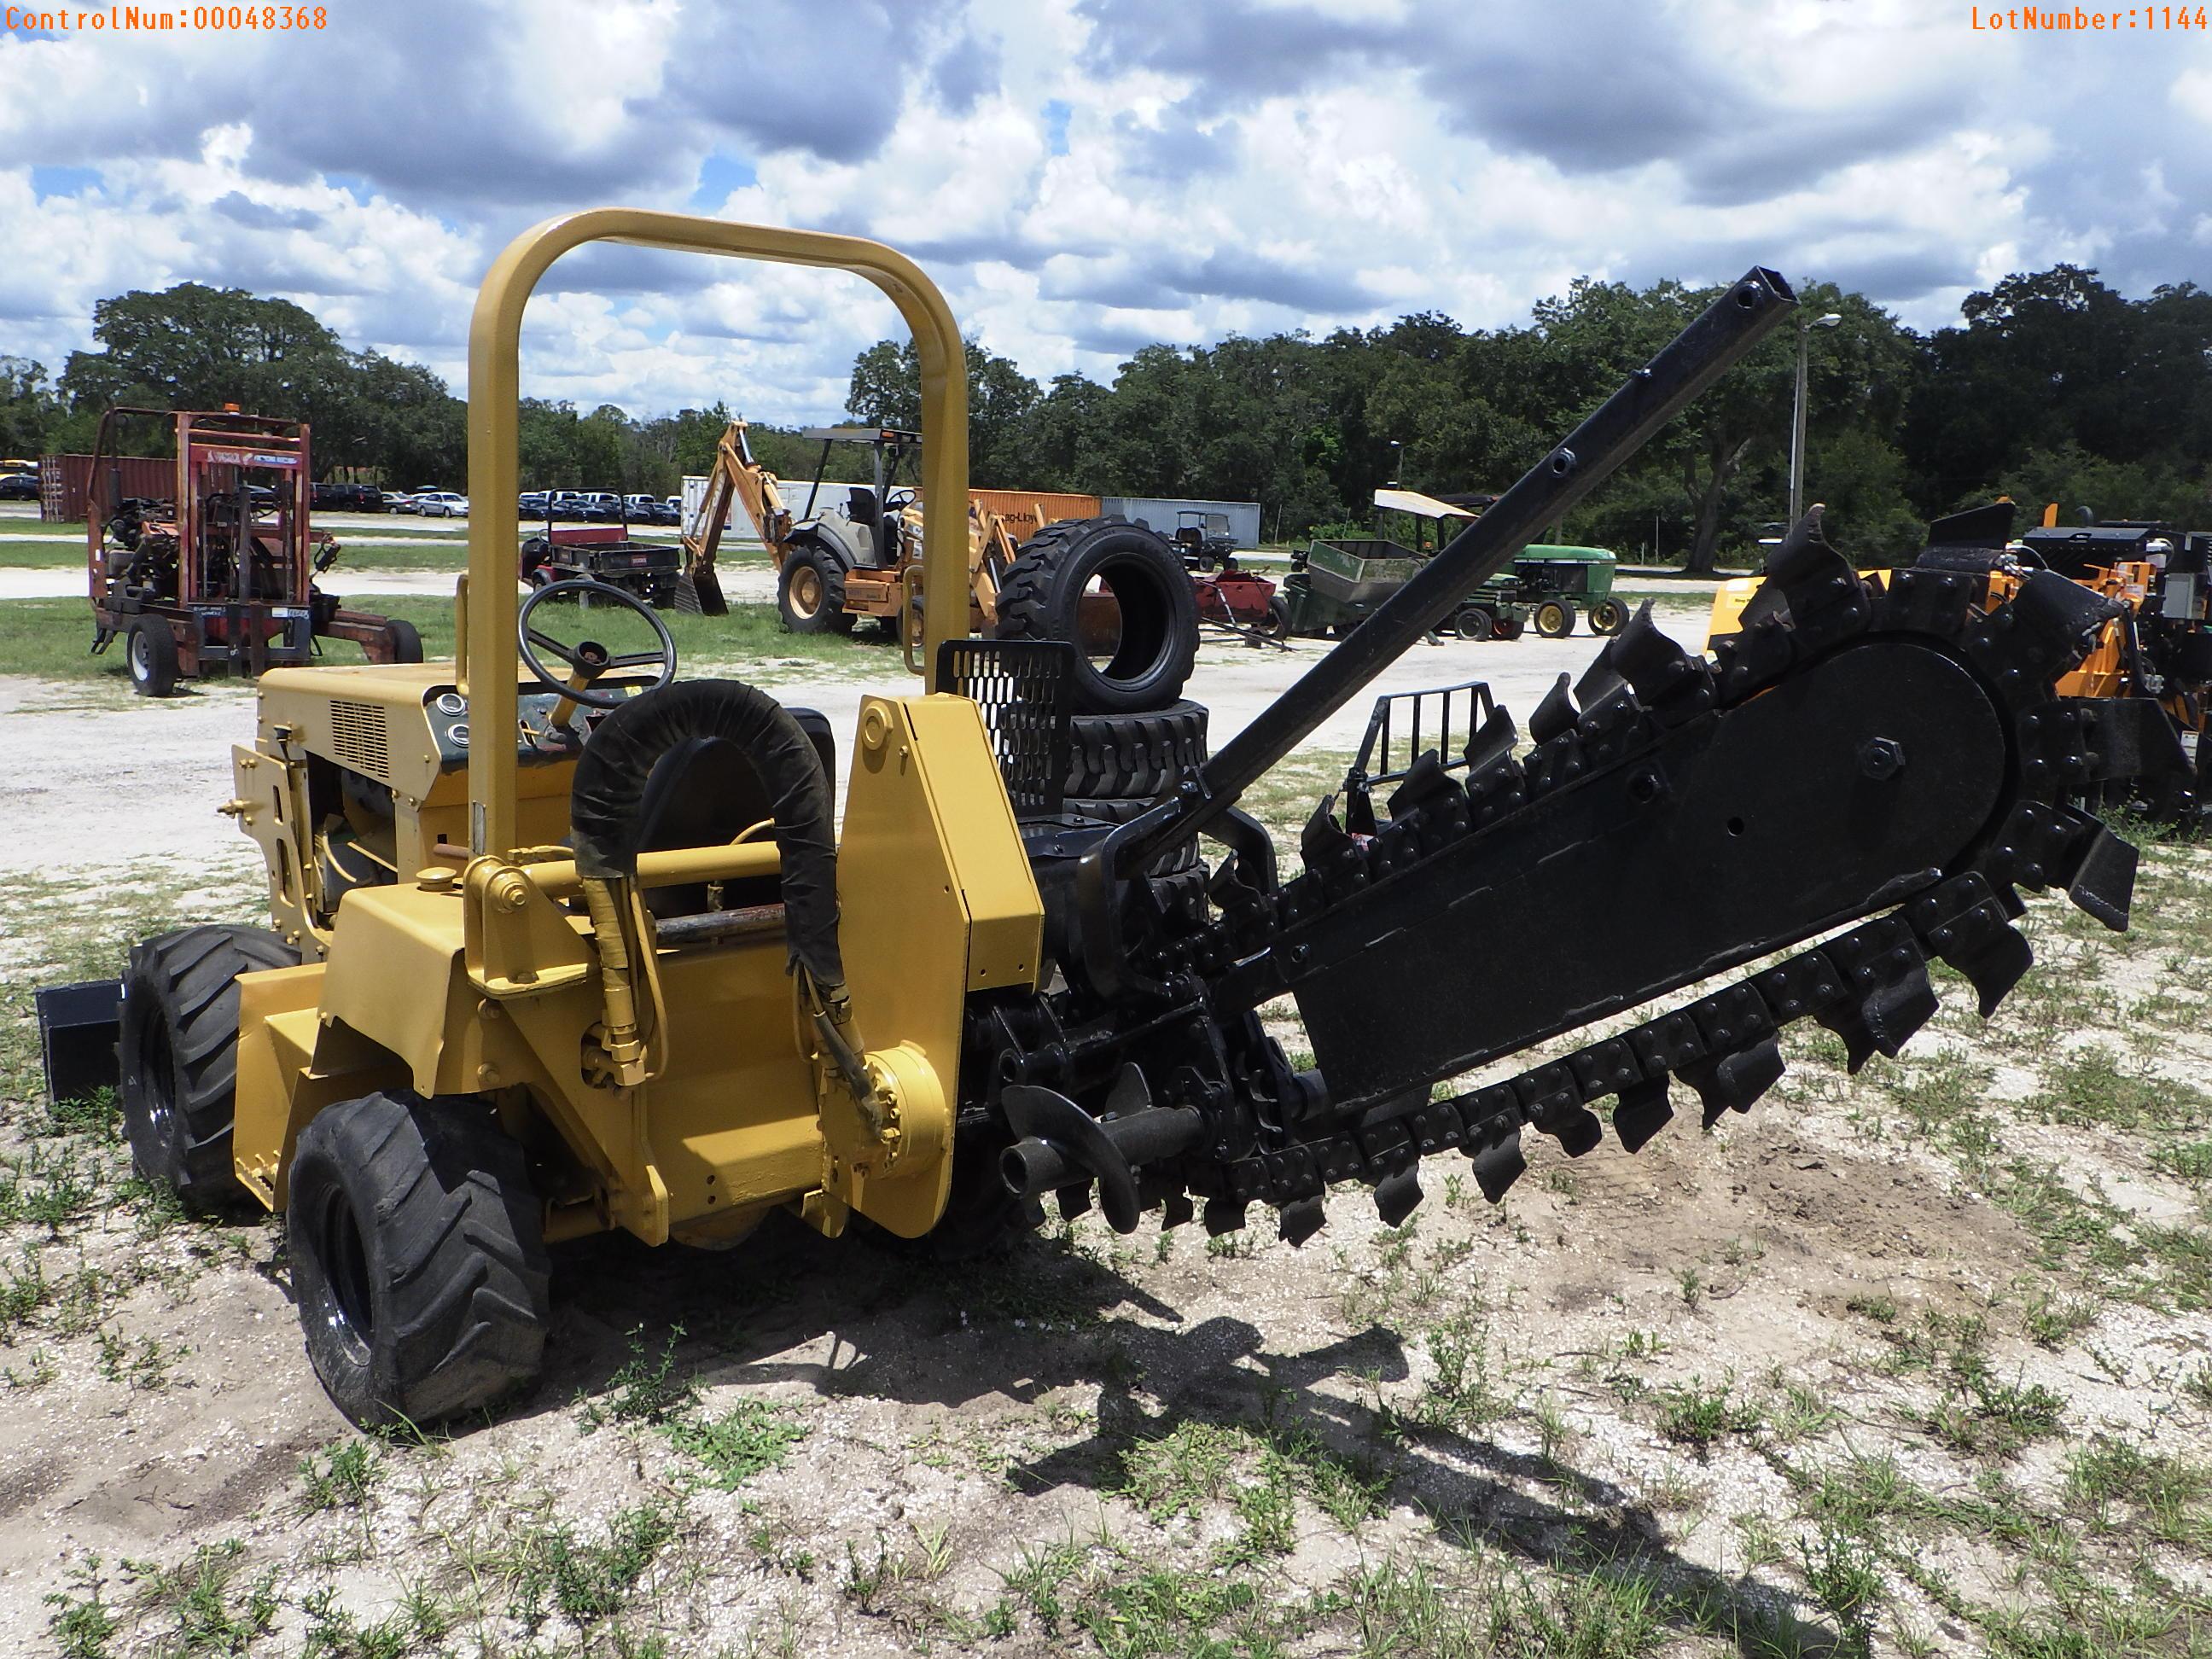 8-01144 (Equip.-Trencher)  Seller:Private/Dealer DITCH WITCH 3700DD TRENCHER WIT